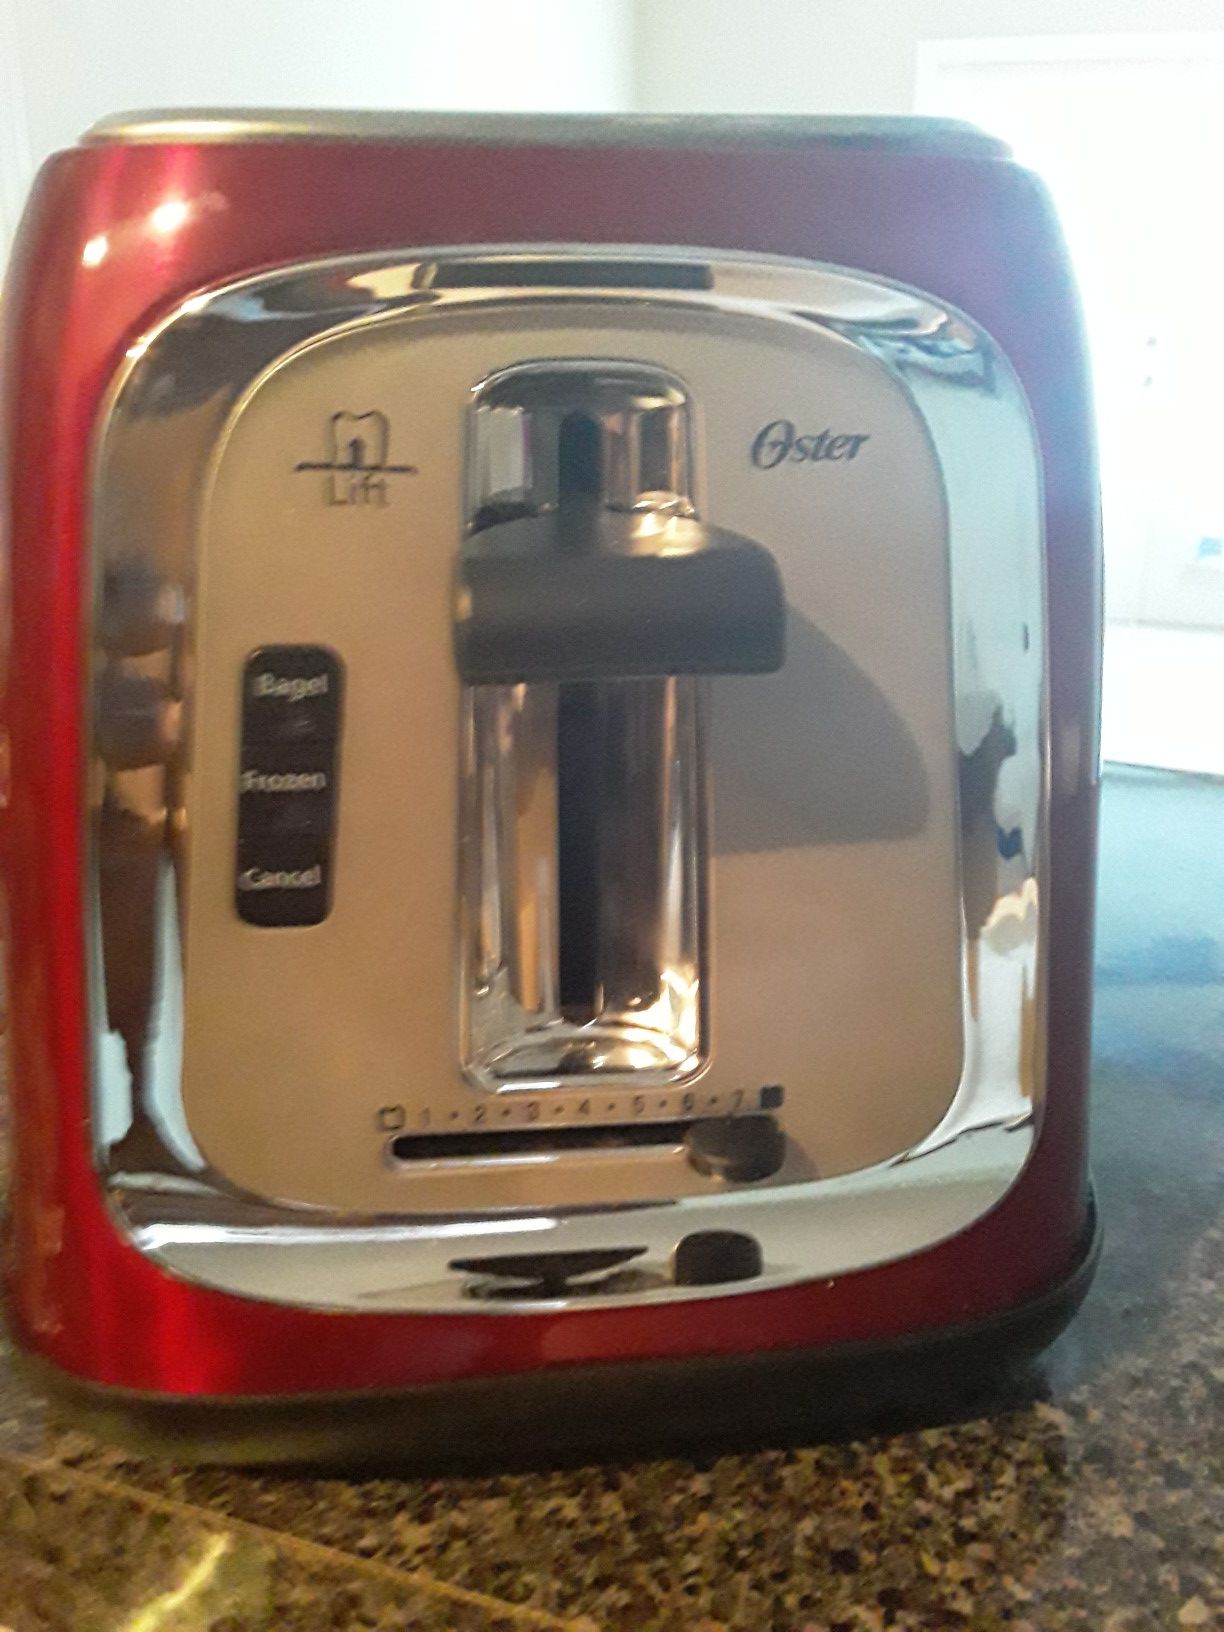 New Oster toaster.